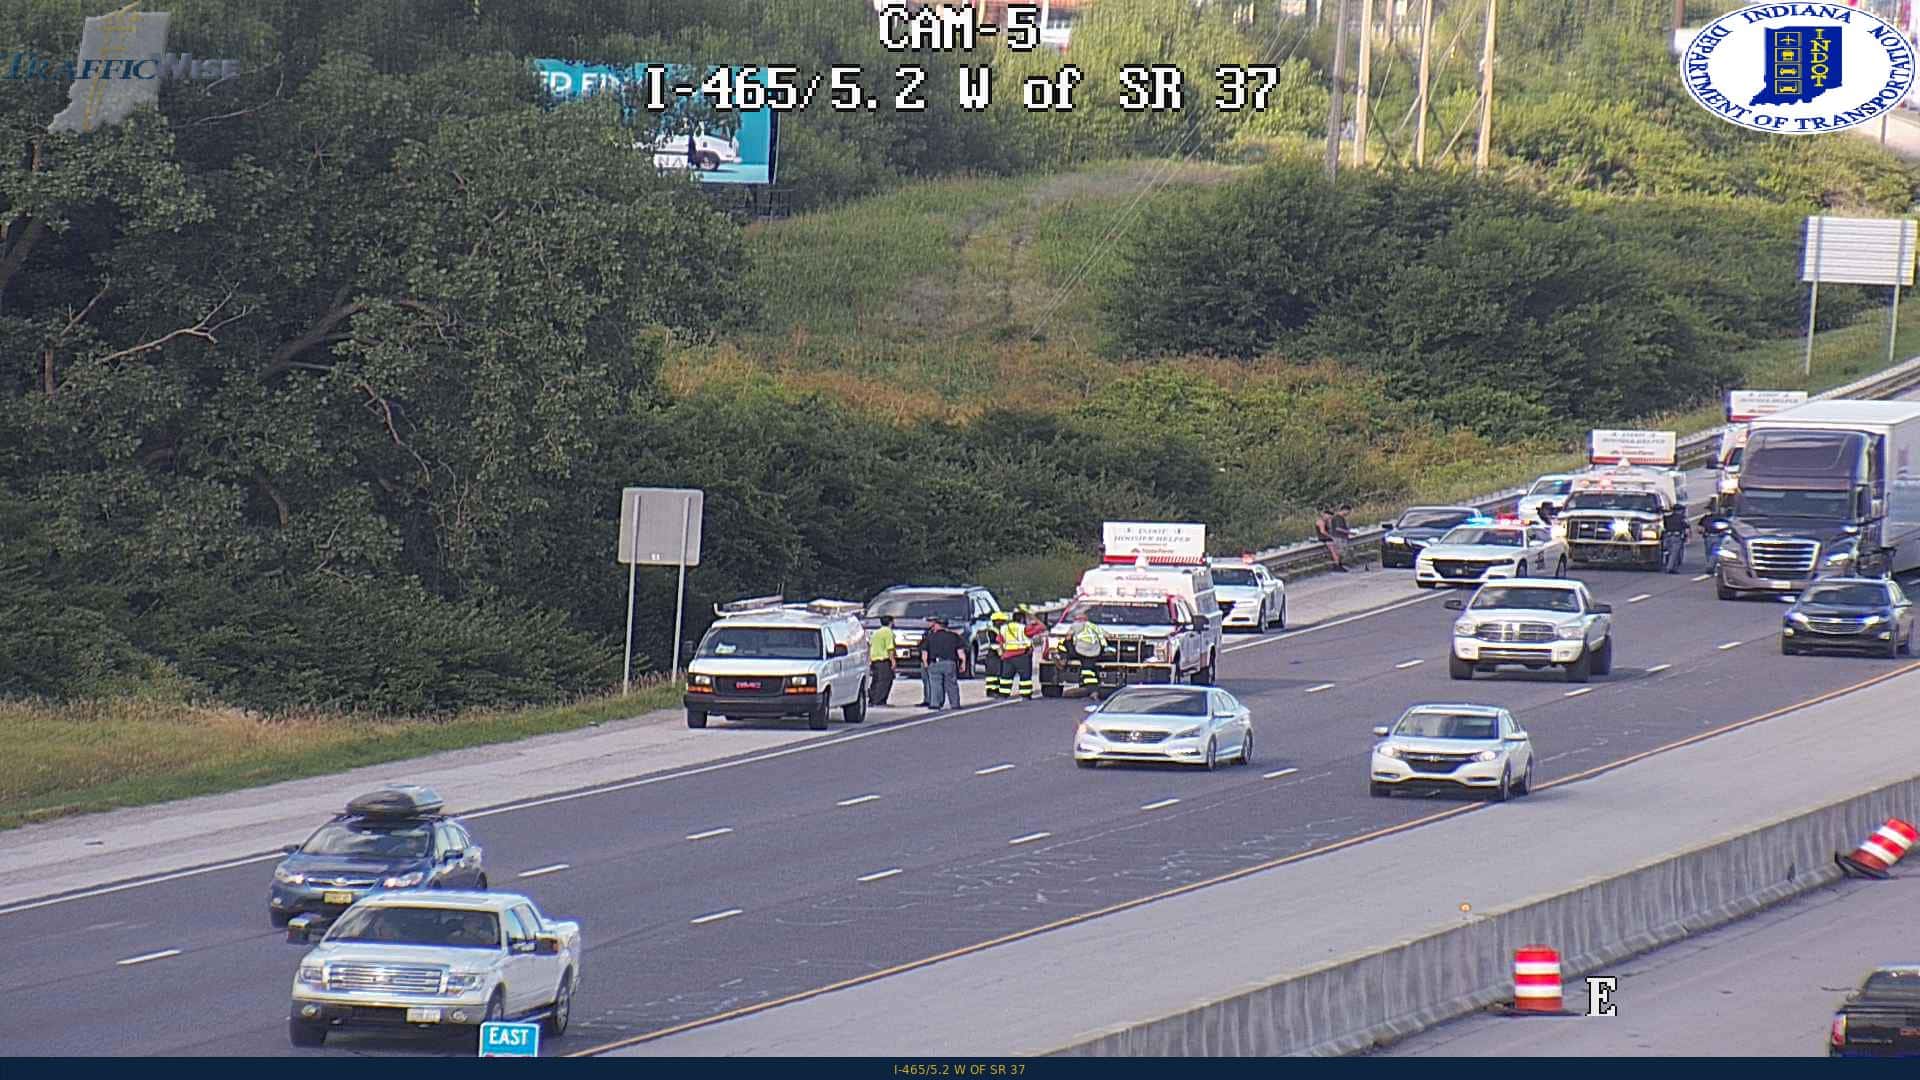 INDOT camera footage of the scene after the shooting on I-465